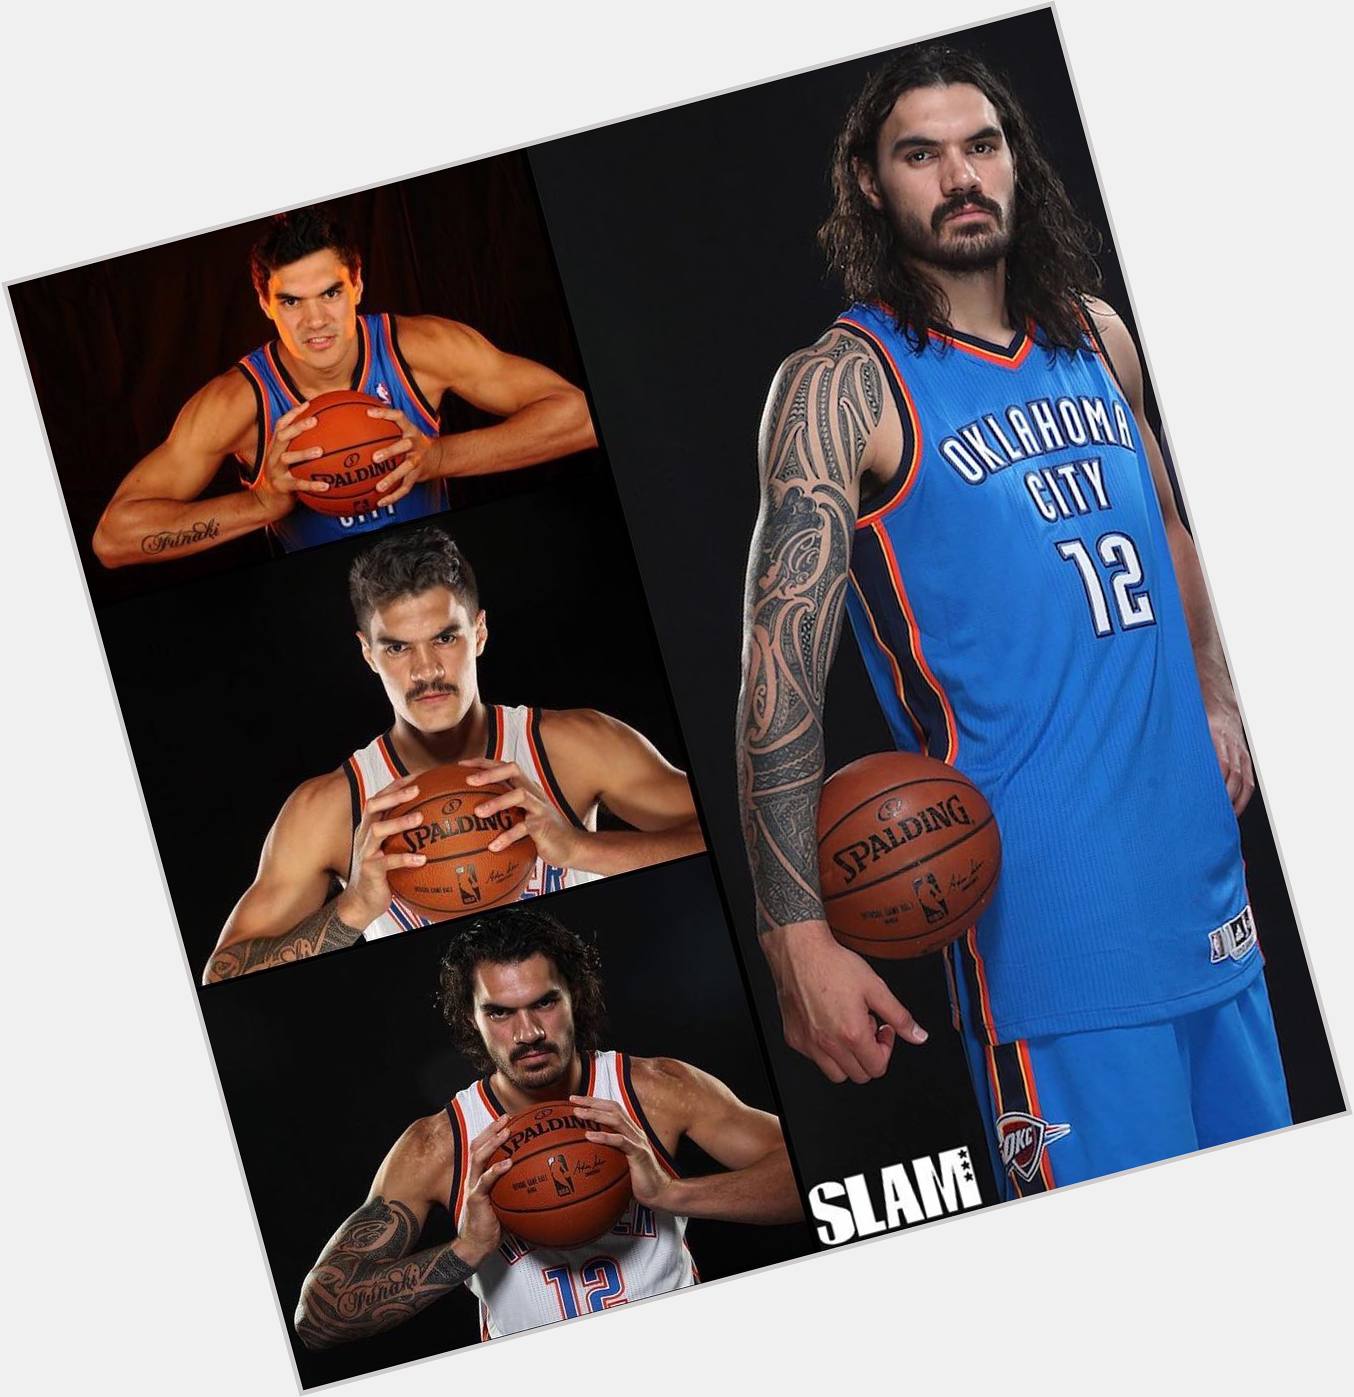 Happy bday Steven Adams! Can\t wait to see your new movie Aquaman. 